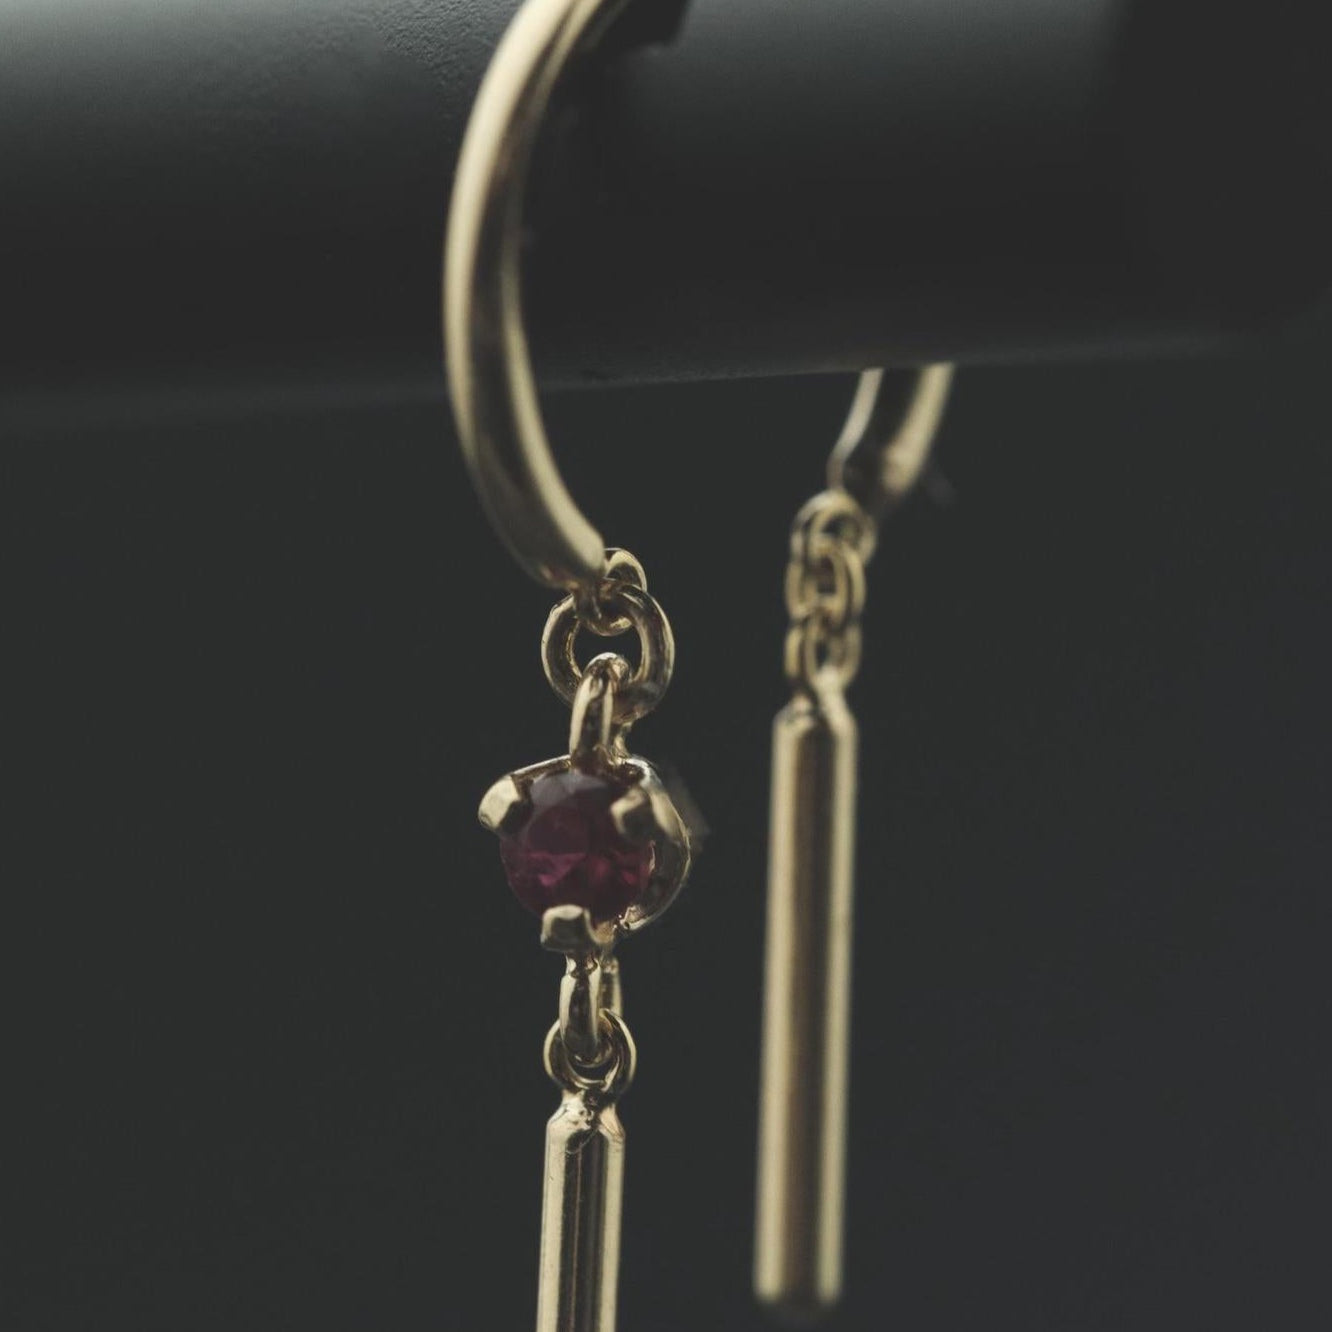 Diamond Baby Chime Earring with Ruby in 14k Yellow Gold by Jack + G